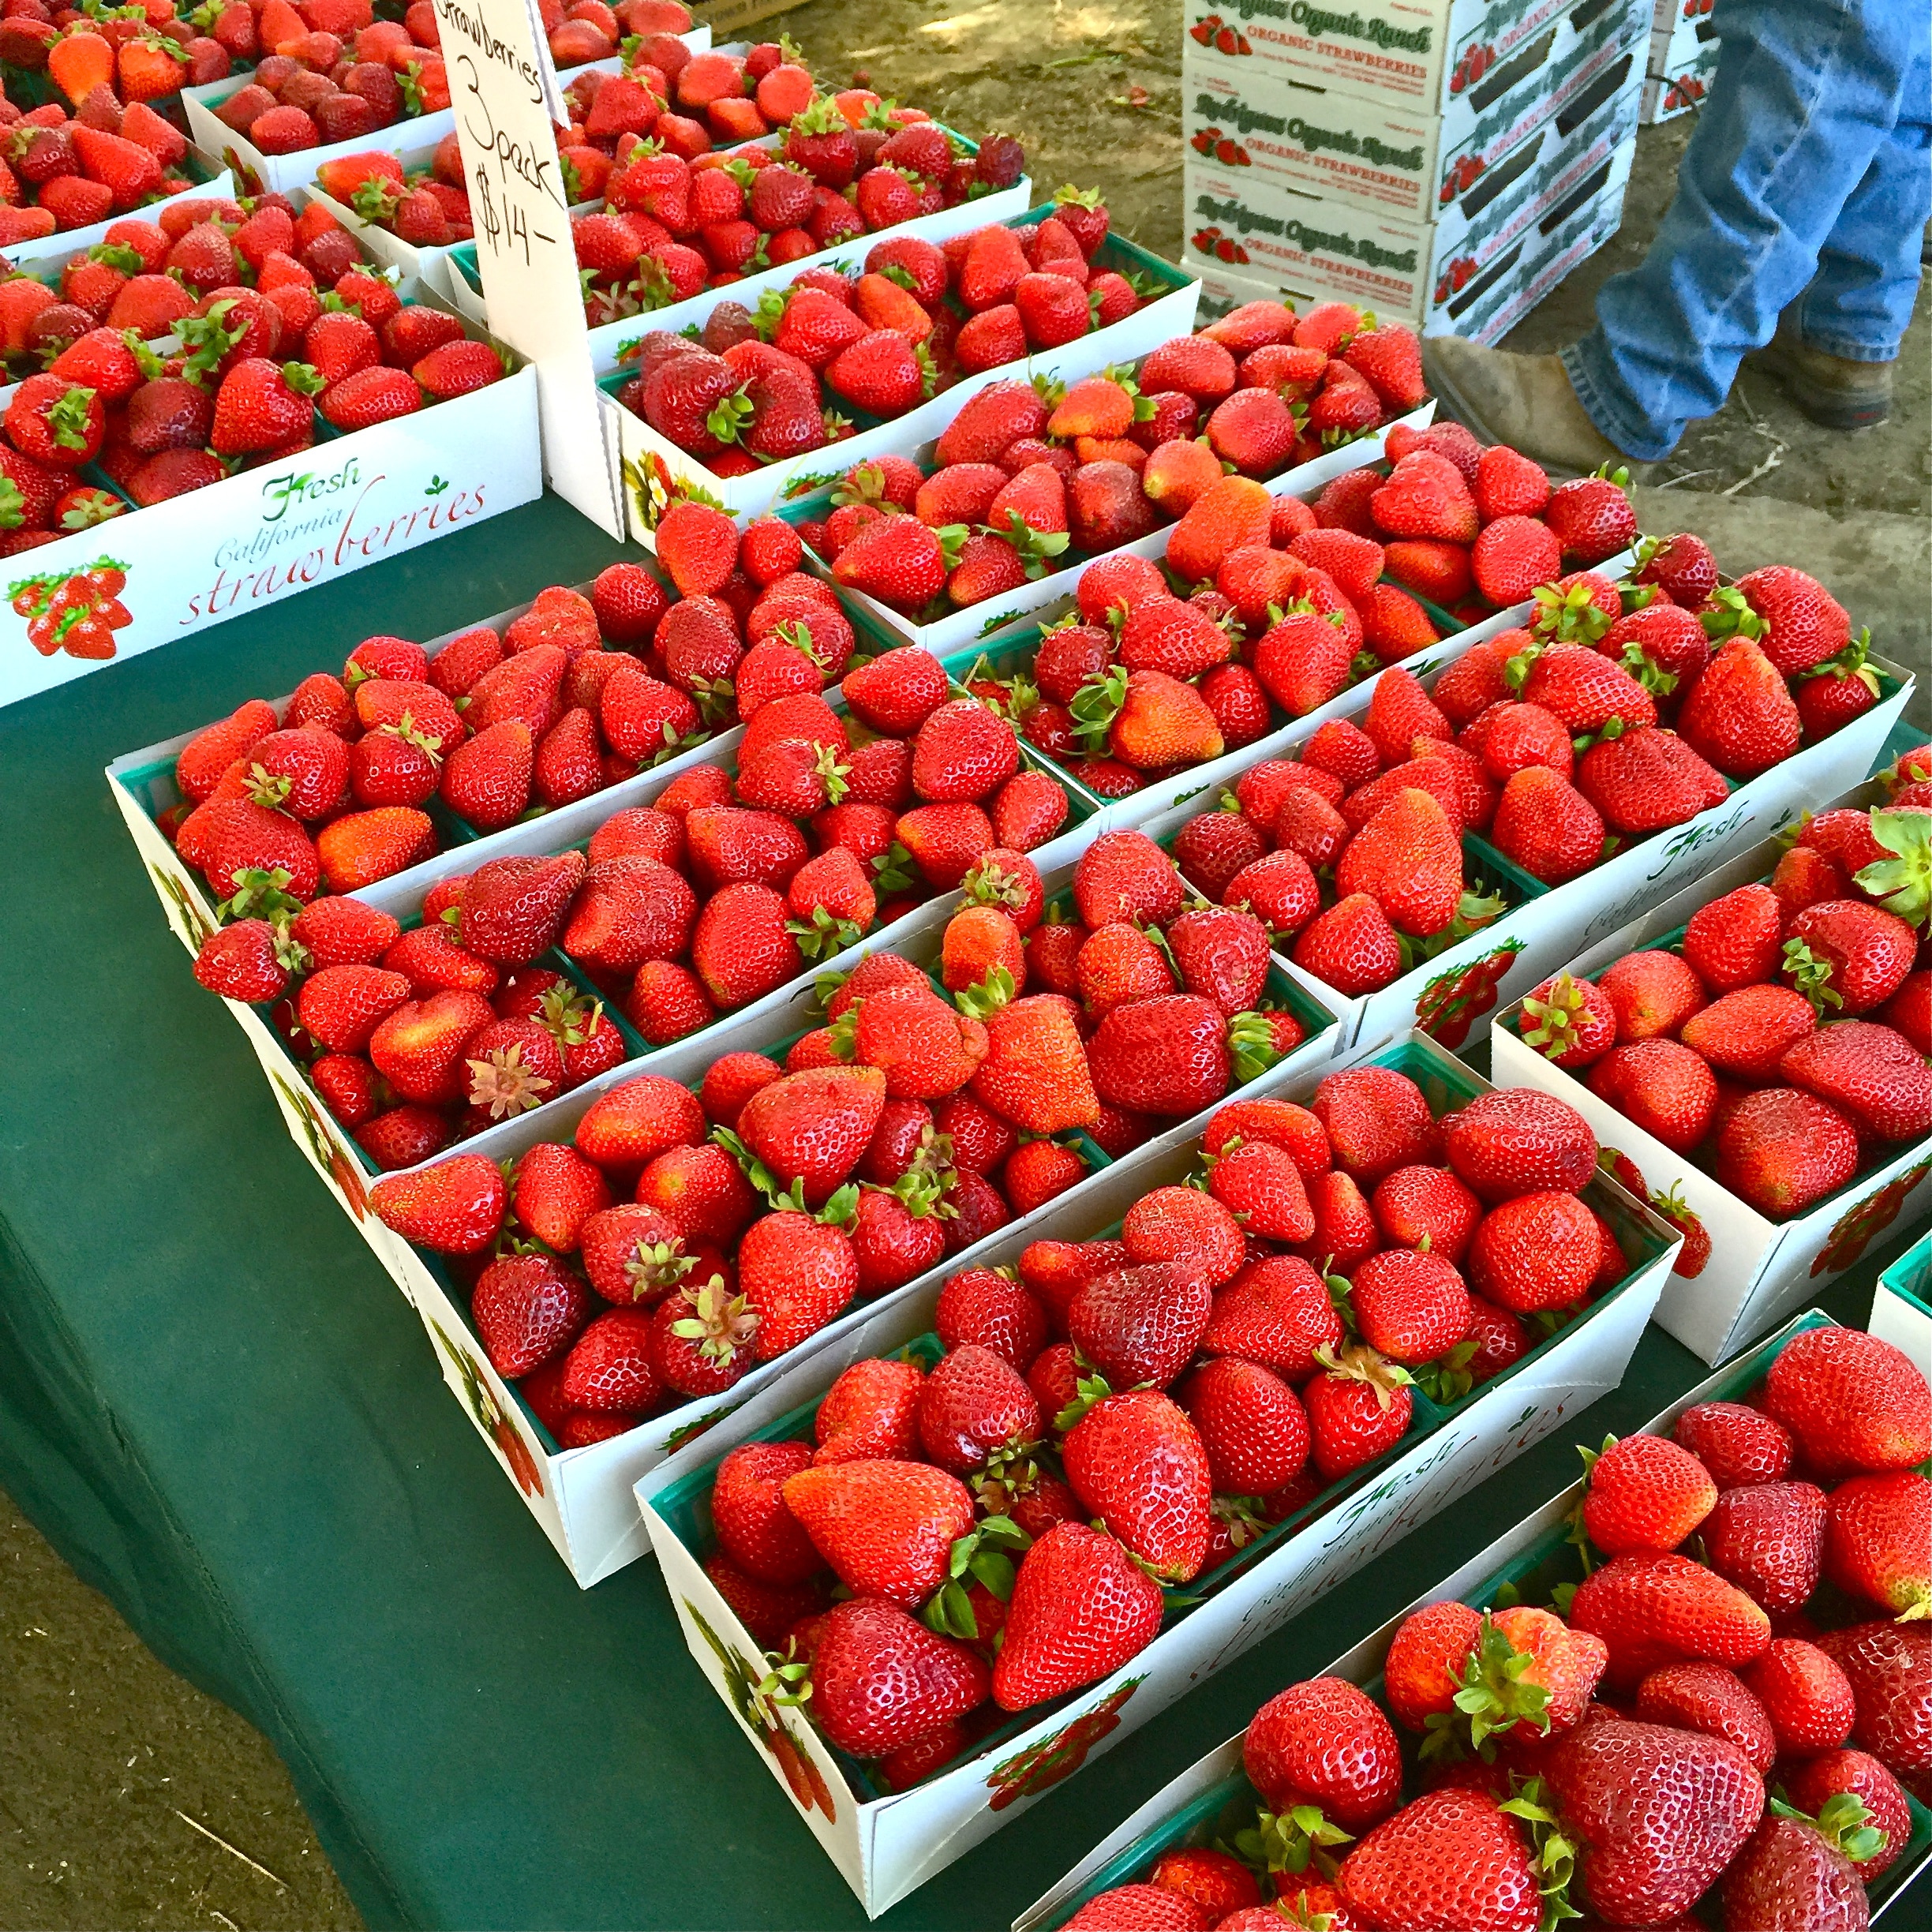 rows and rows of fresh strawberries at the Farmers Market.  